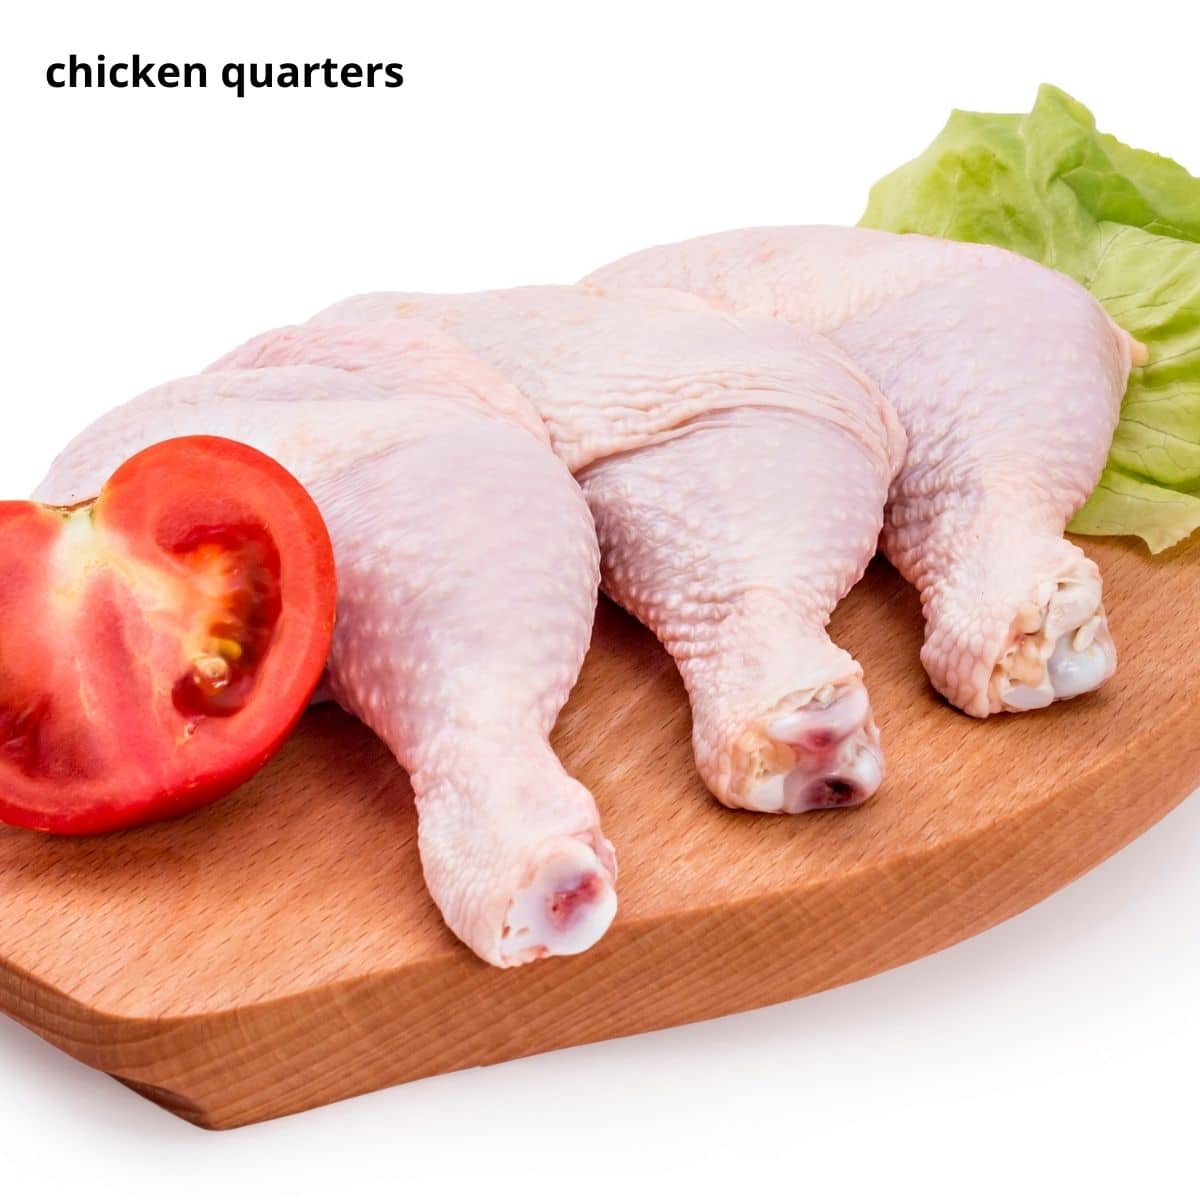 three raw chicken quarters and half a tomato on a wooden board.